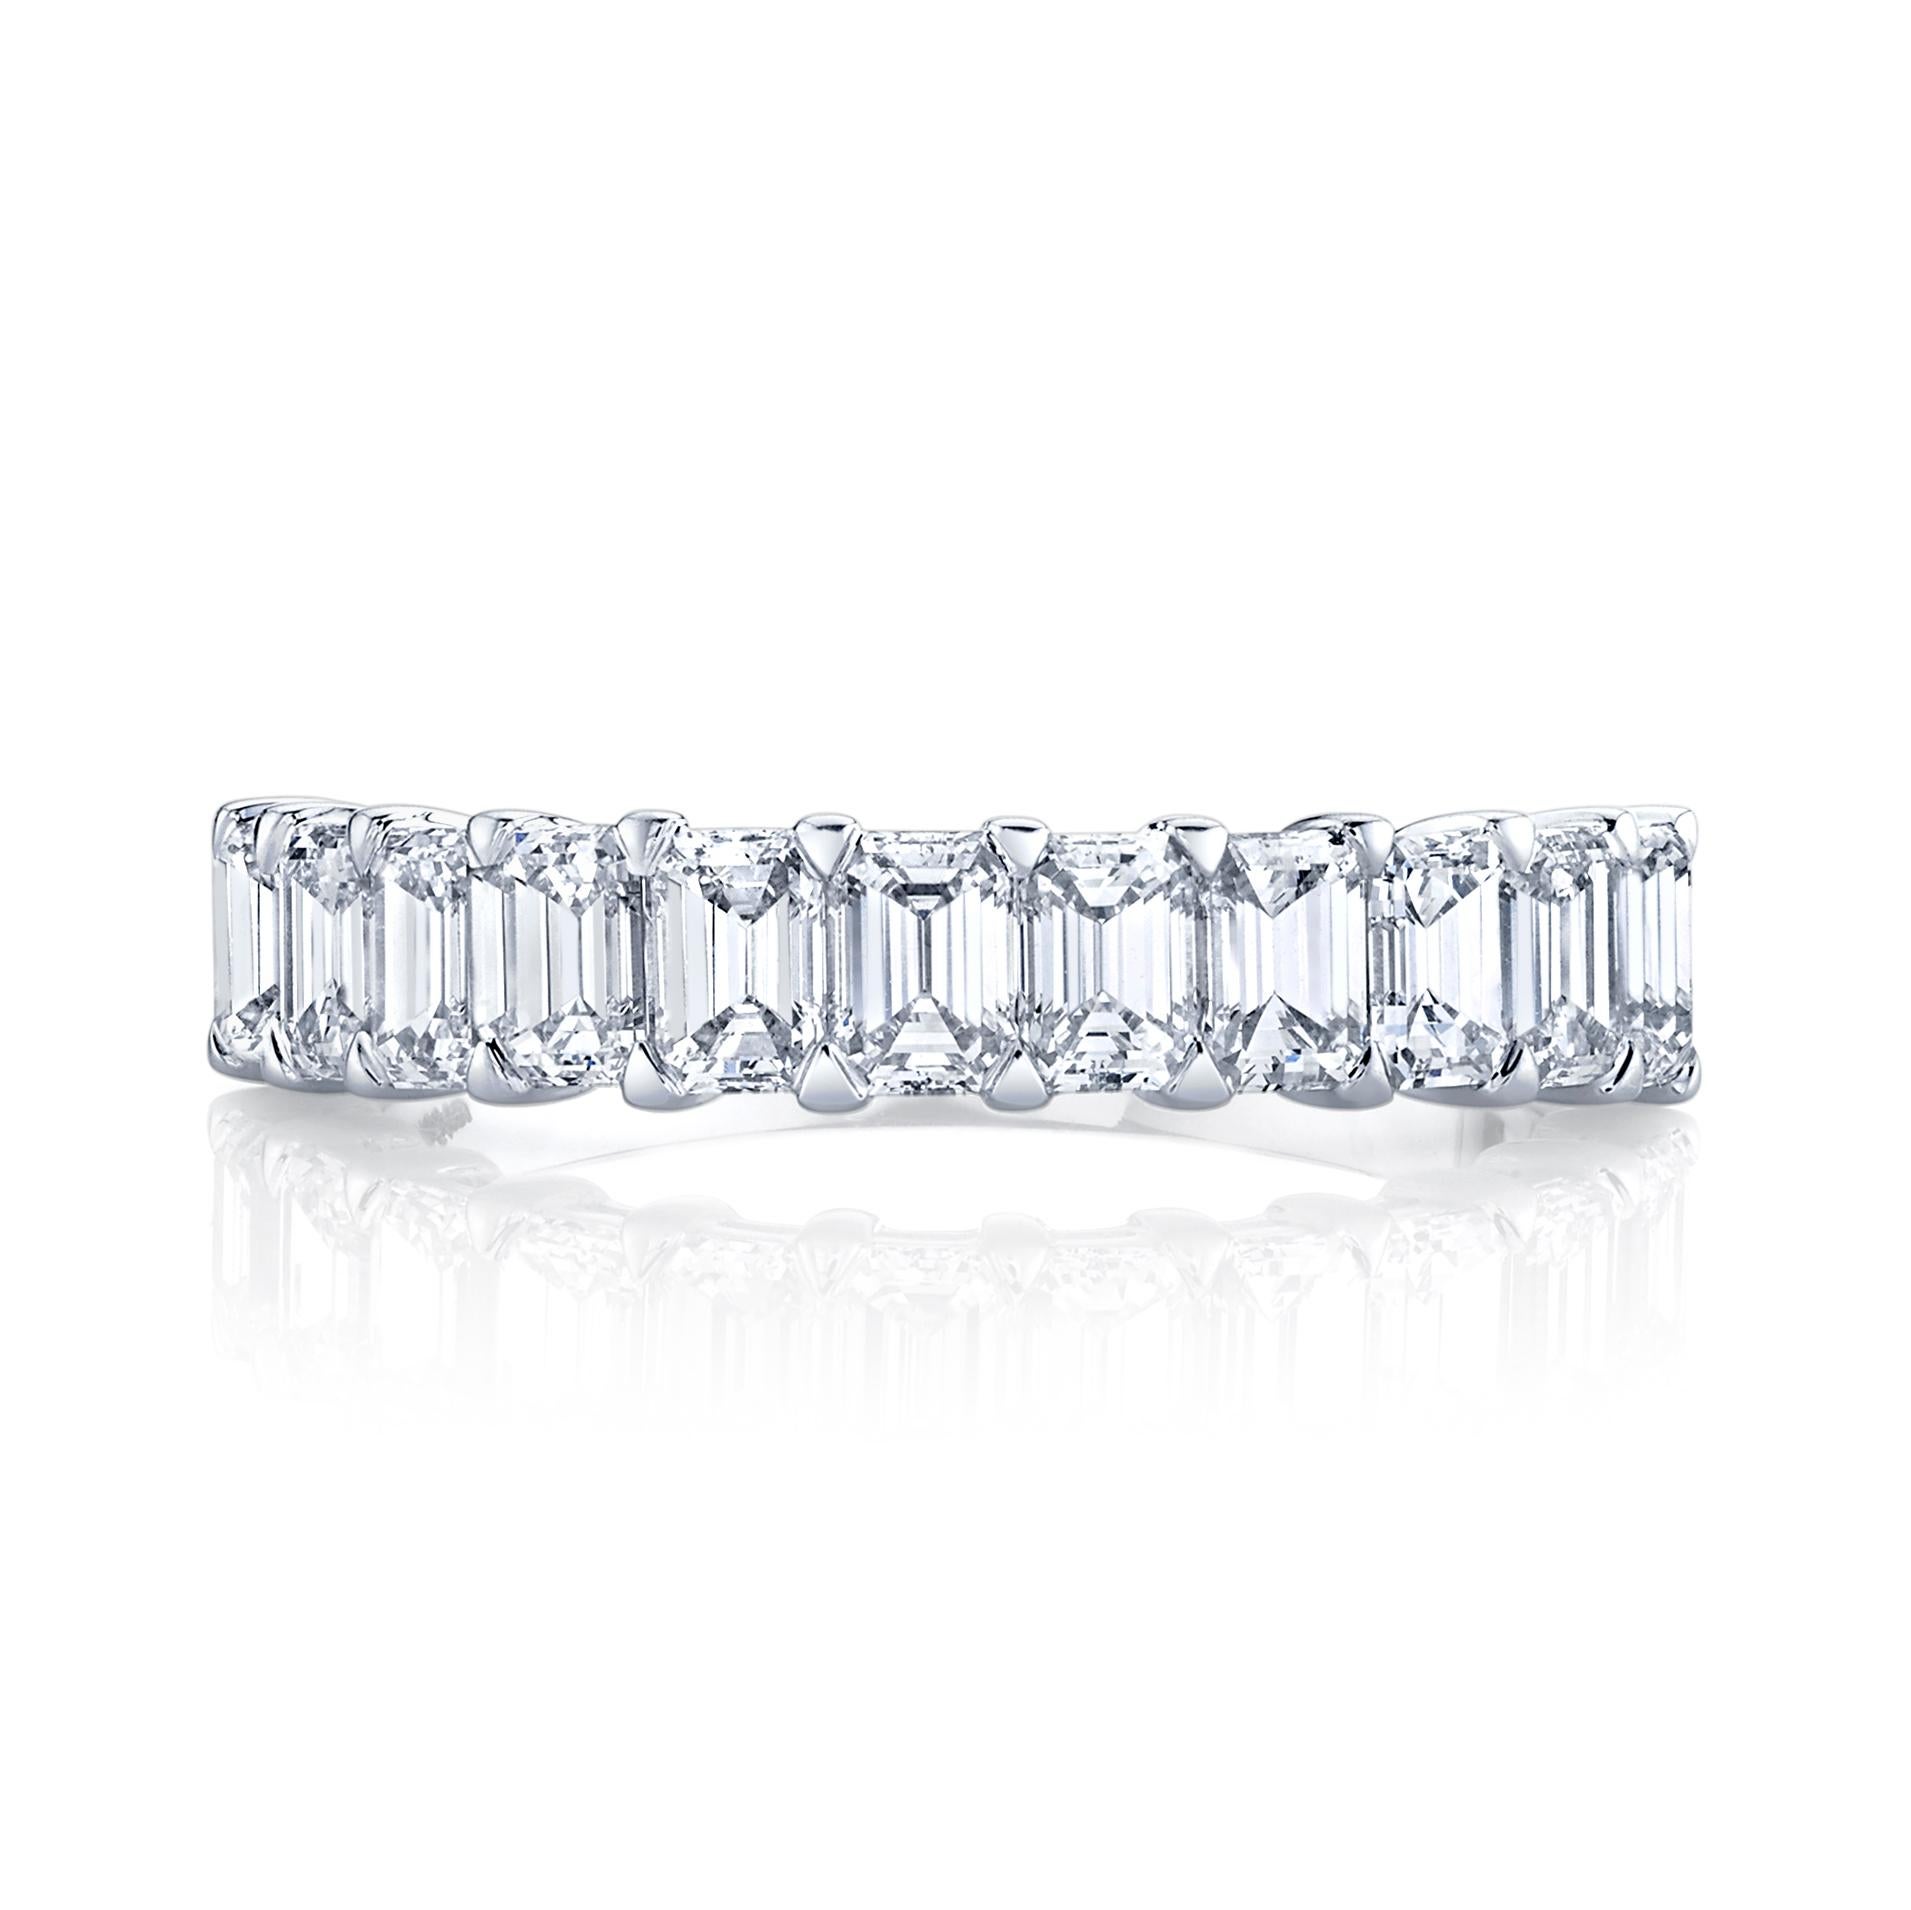 Halfway Eternity Band with 11 Emerald Cut Diamonds set in 18k white gold.
11 stones 1.65 carat total weight 
Approximate Color G - I  Clarity VVS - VS  
Ring size 6.5